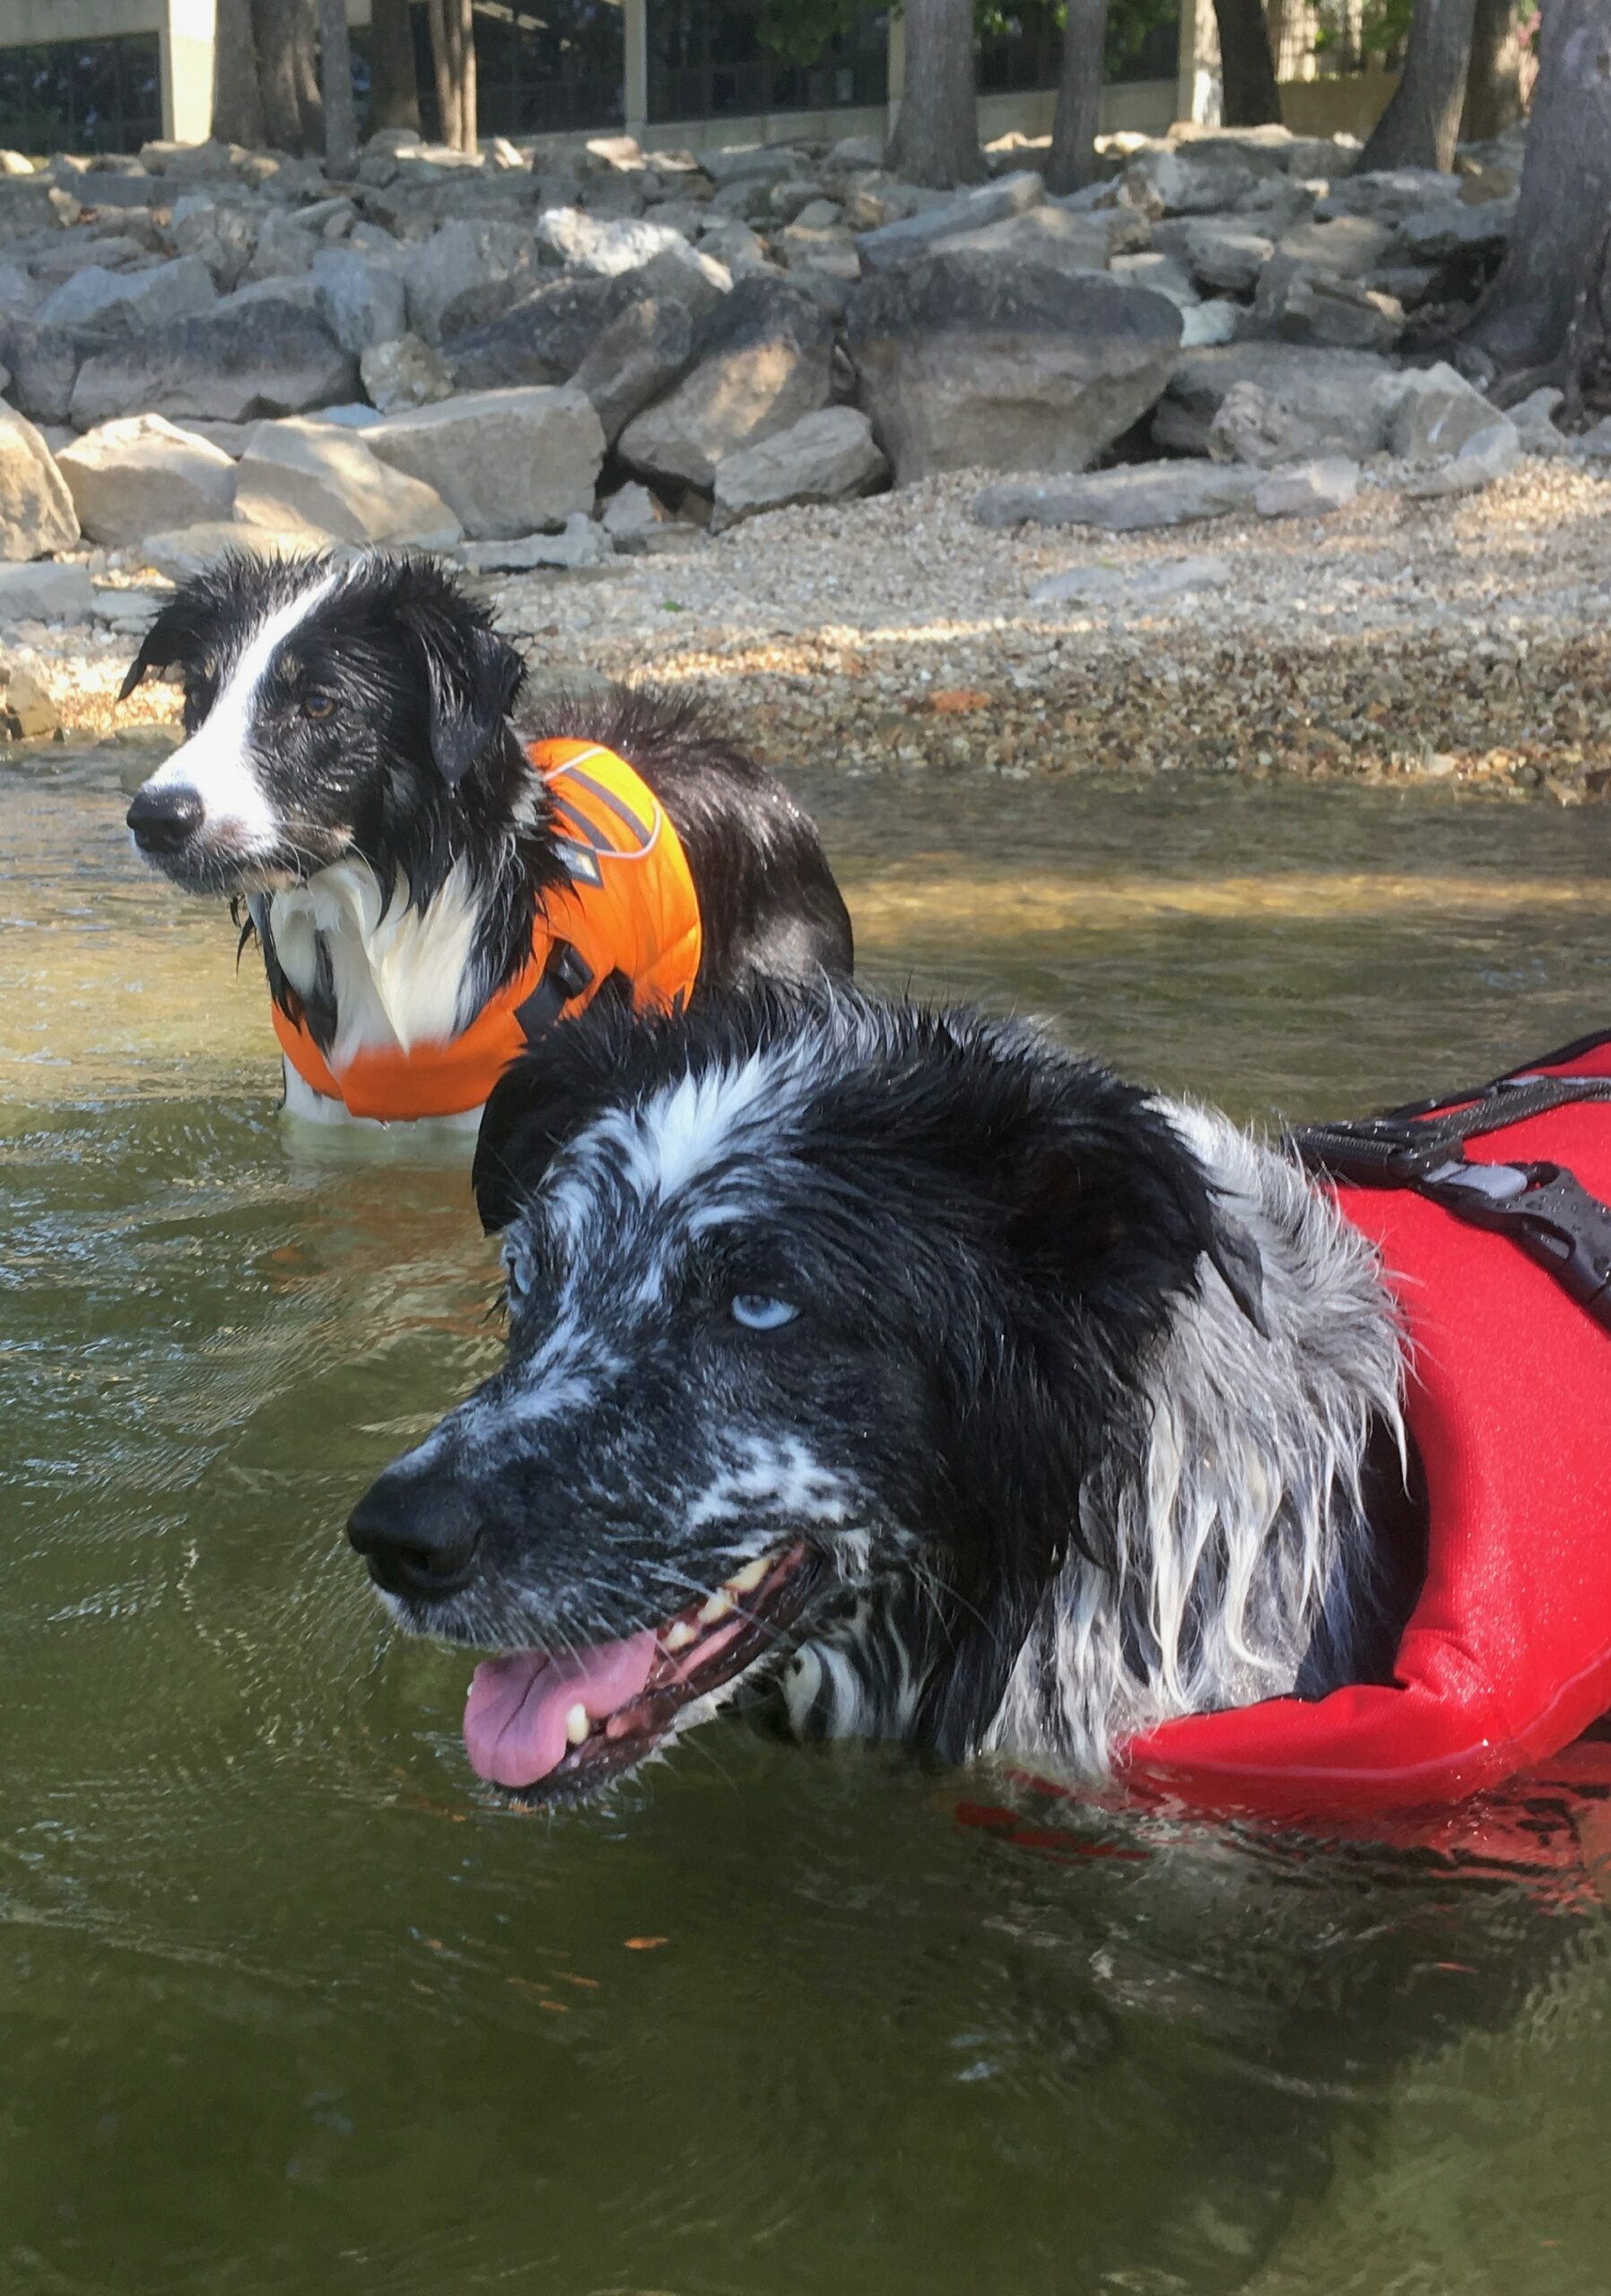 Dogs in water, wearing life jackets.